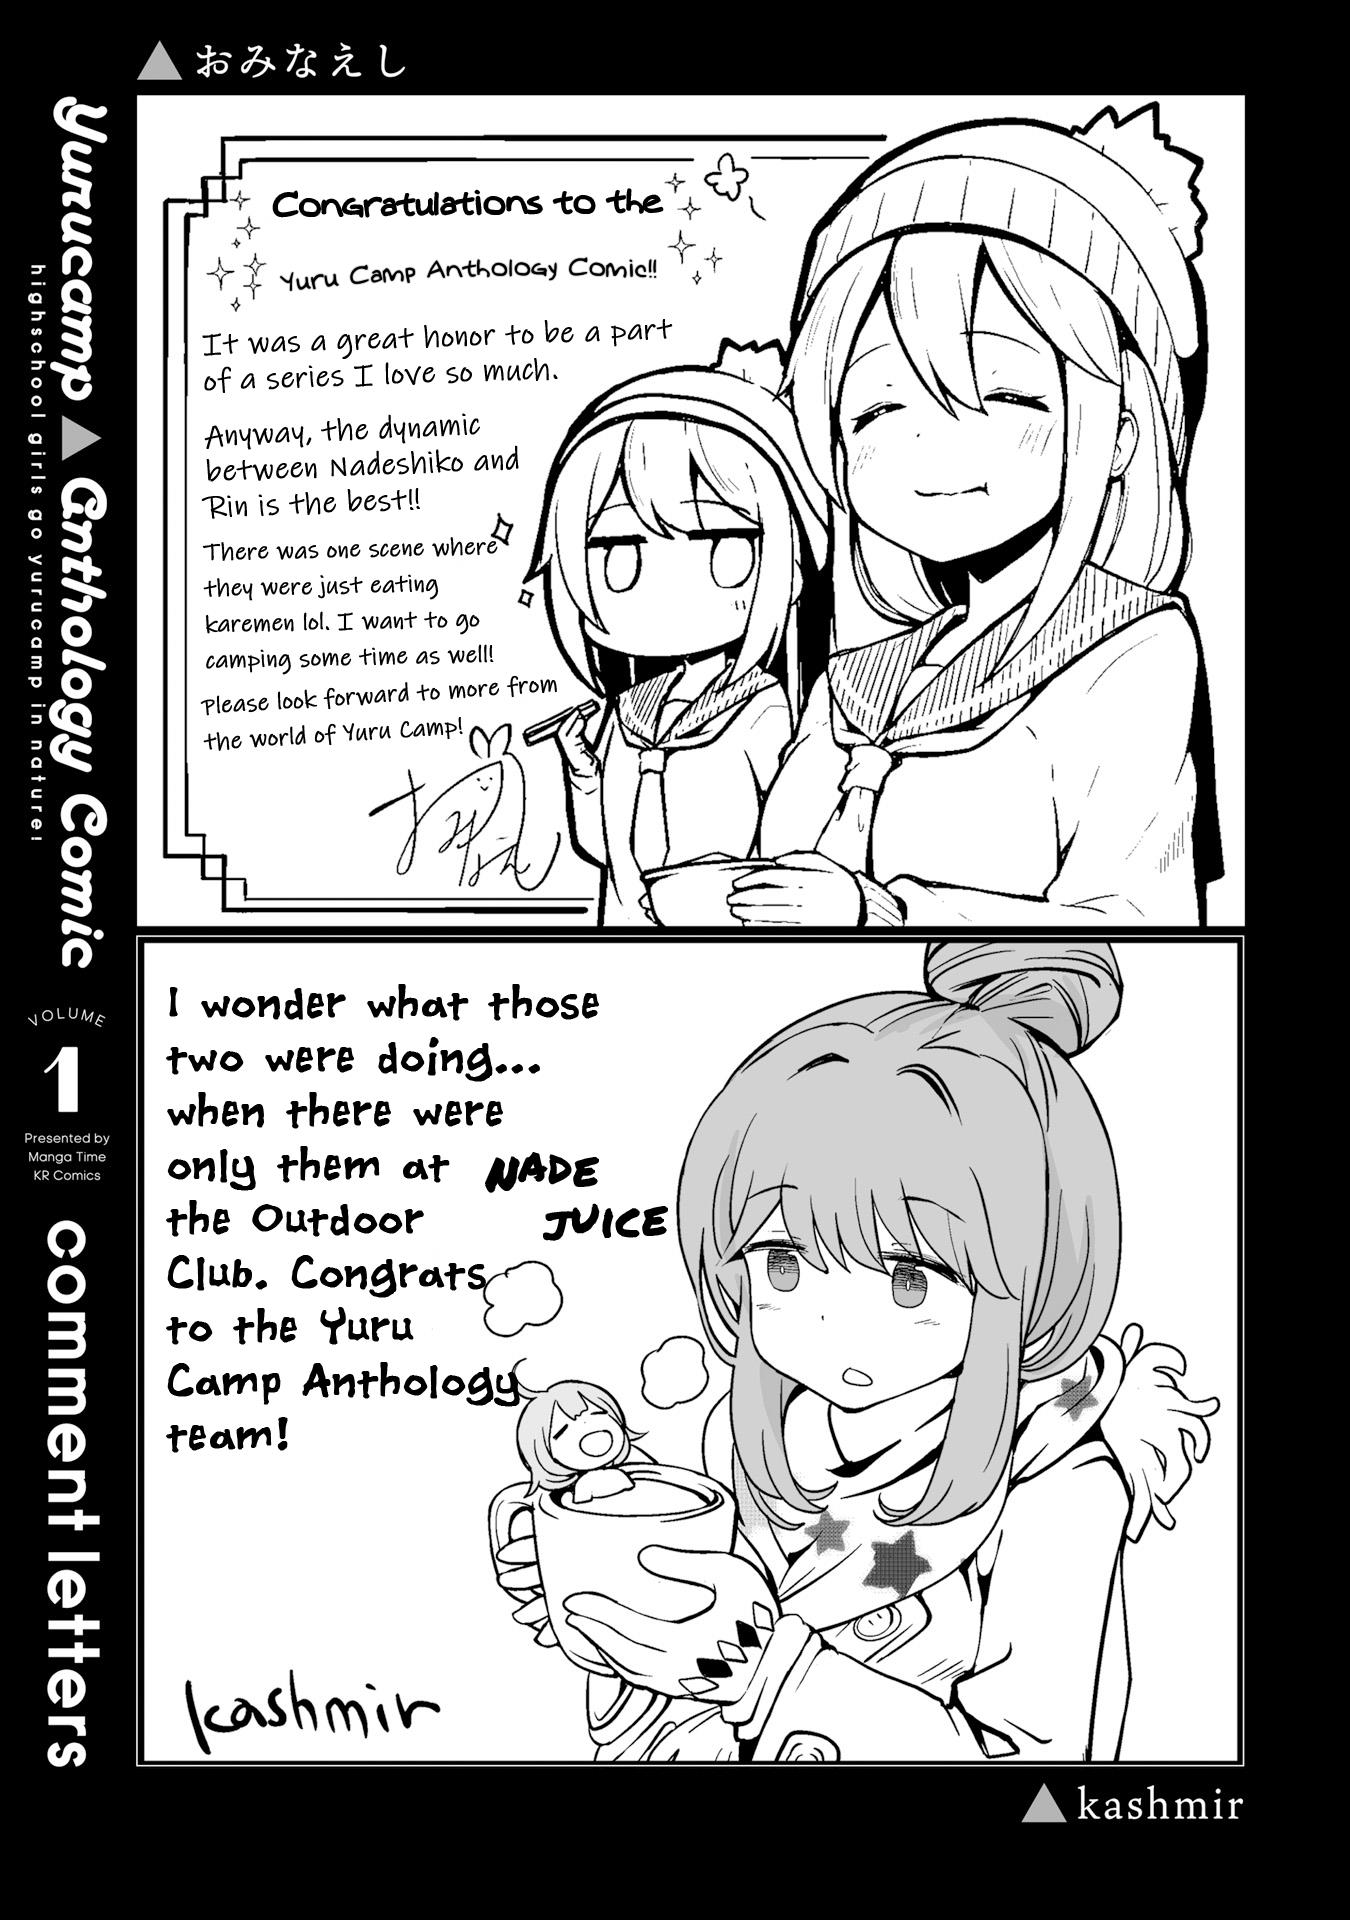 Yuru Camp △ Anthology Comic Vol.1 Chapter 16.5: Extras - Picture 3